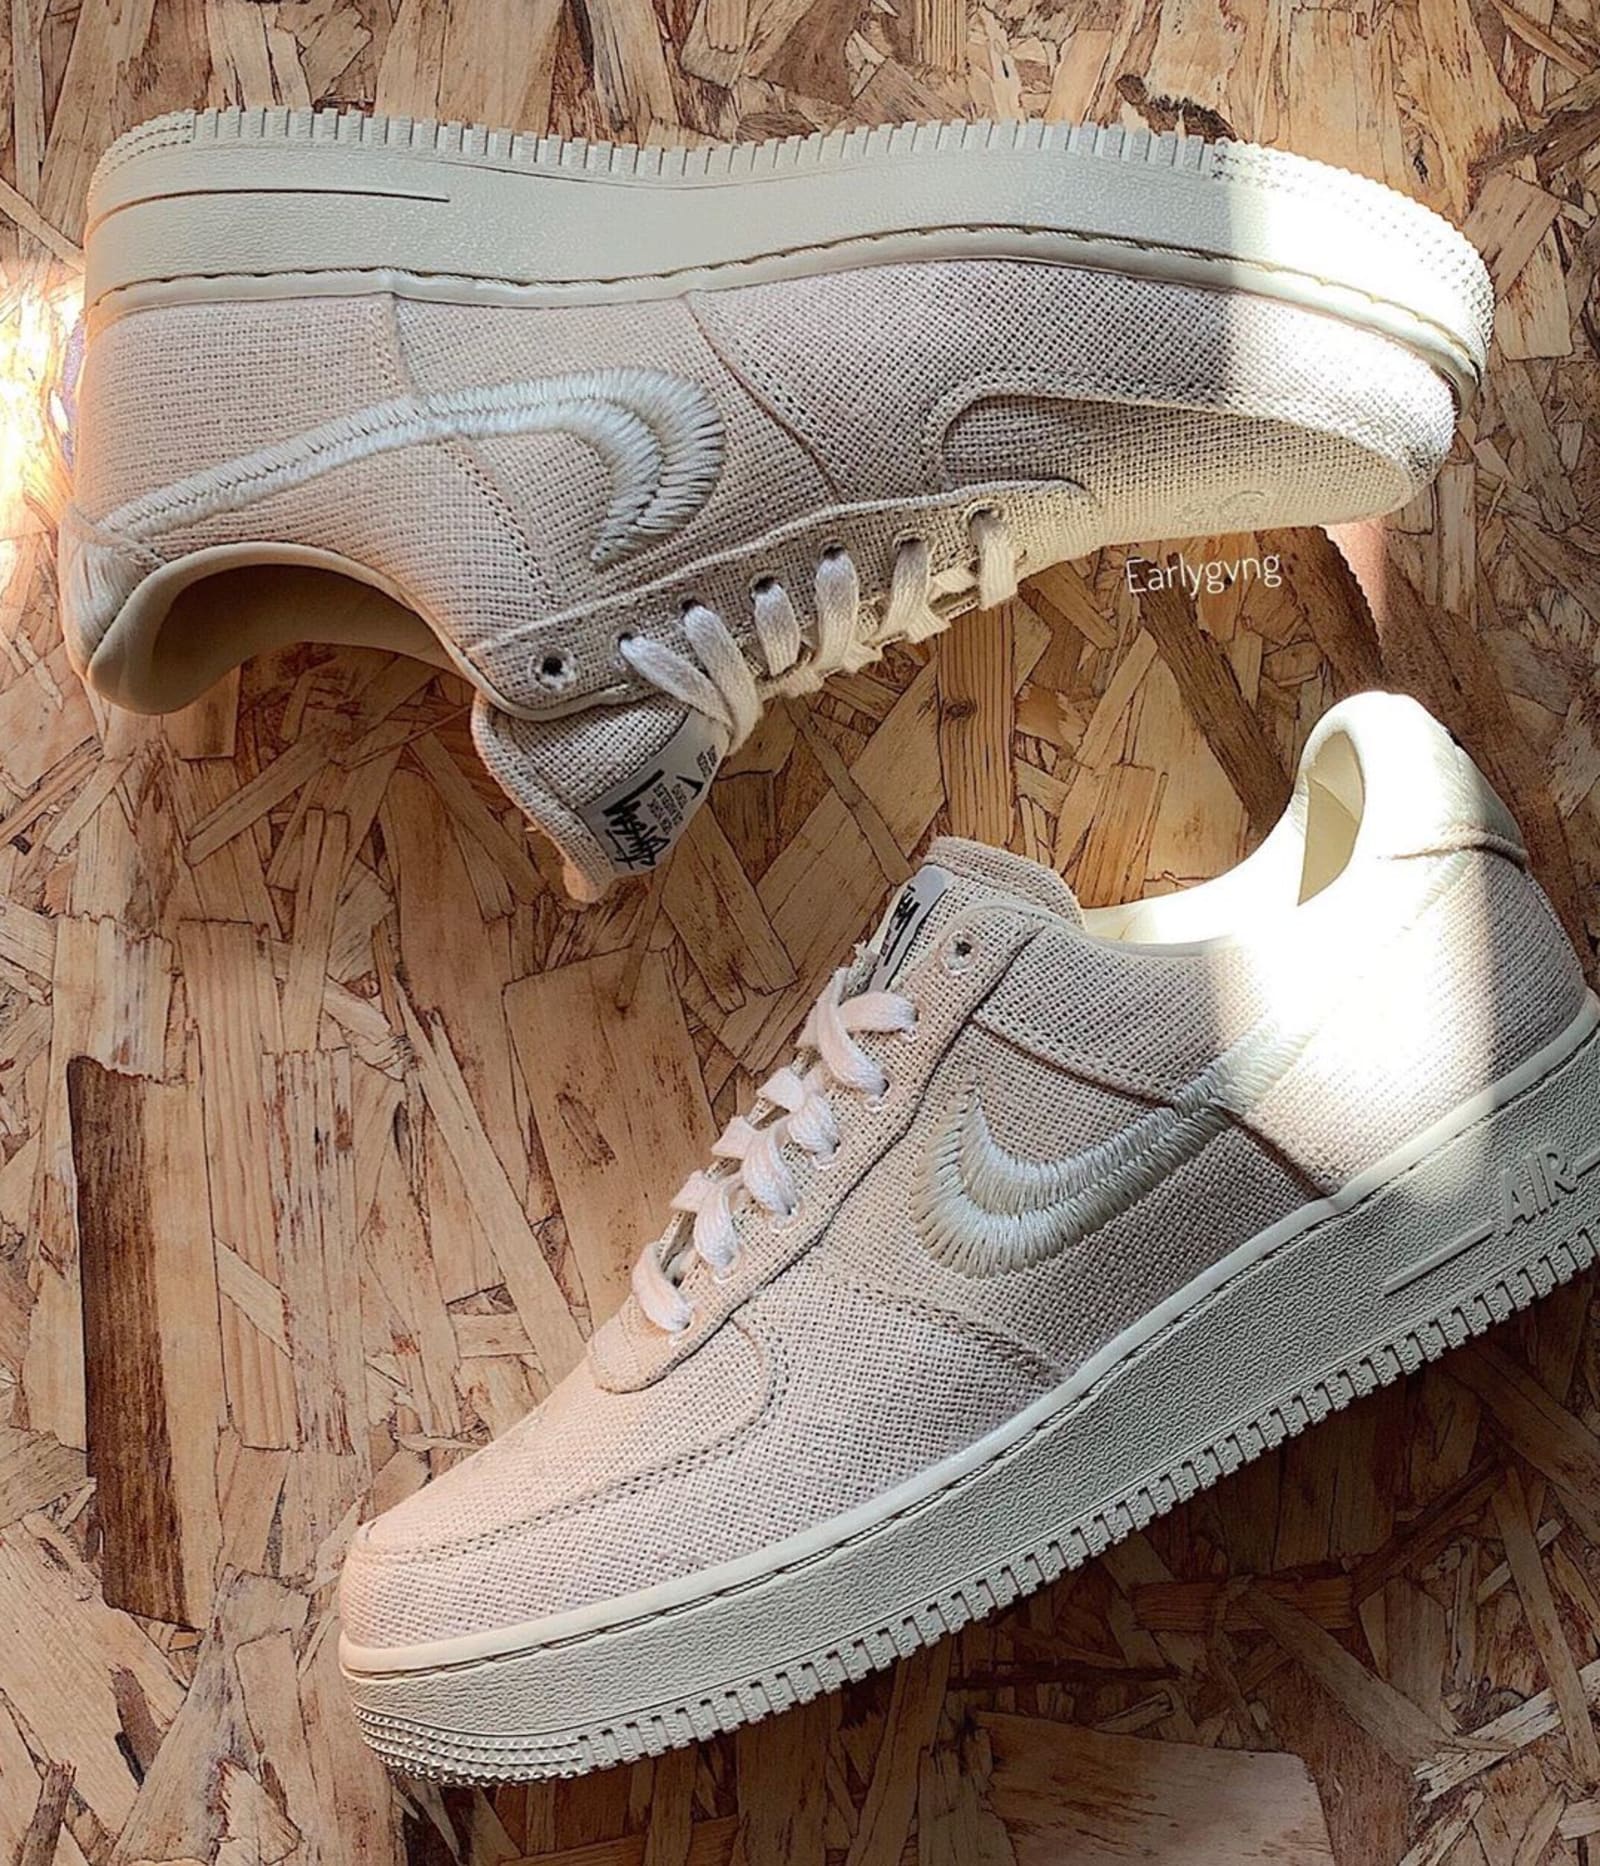 Snooze Savant Nu Nike And Stüssy Make A Cozy Statement With A Hemp Air Force 1 | SNOBETTE